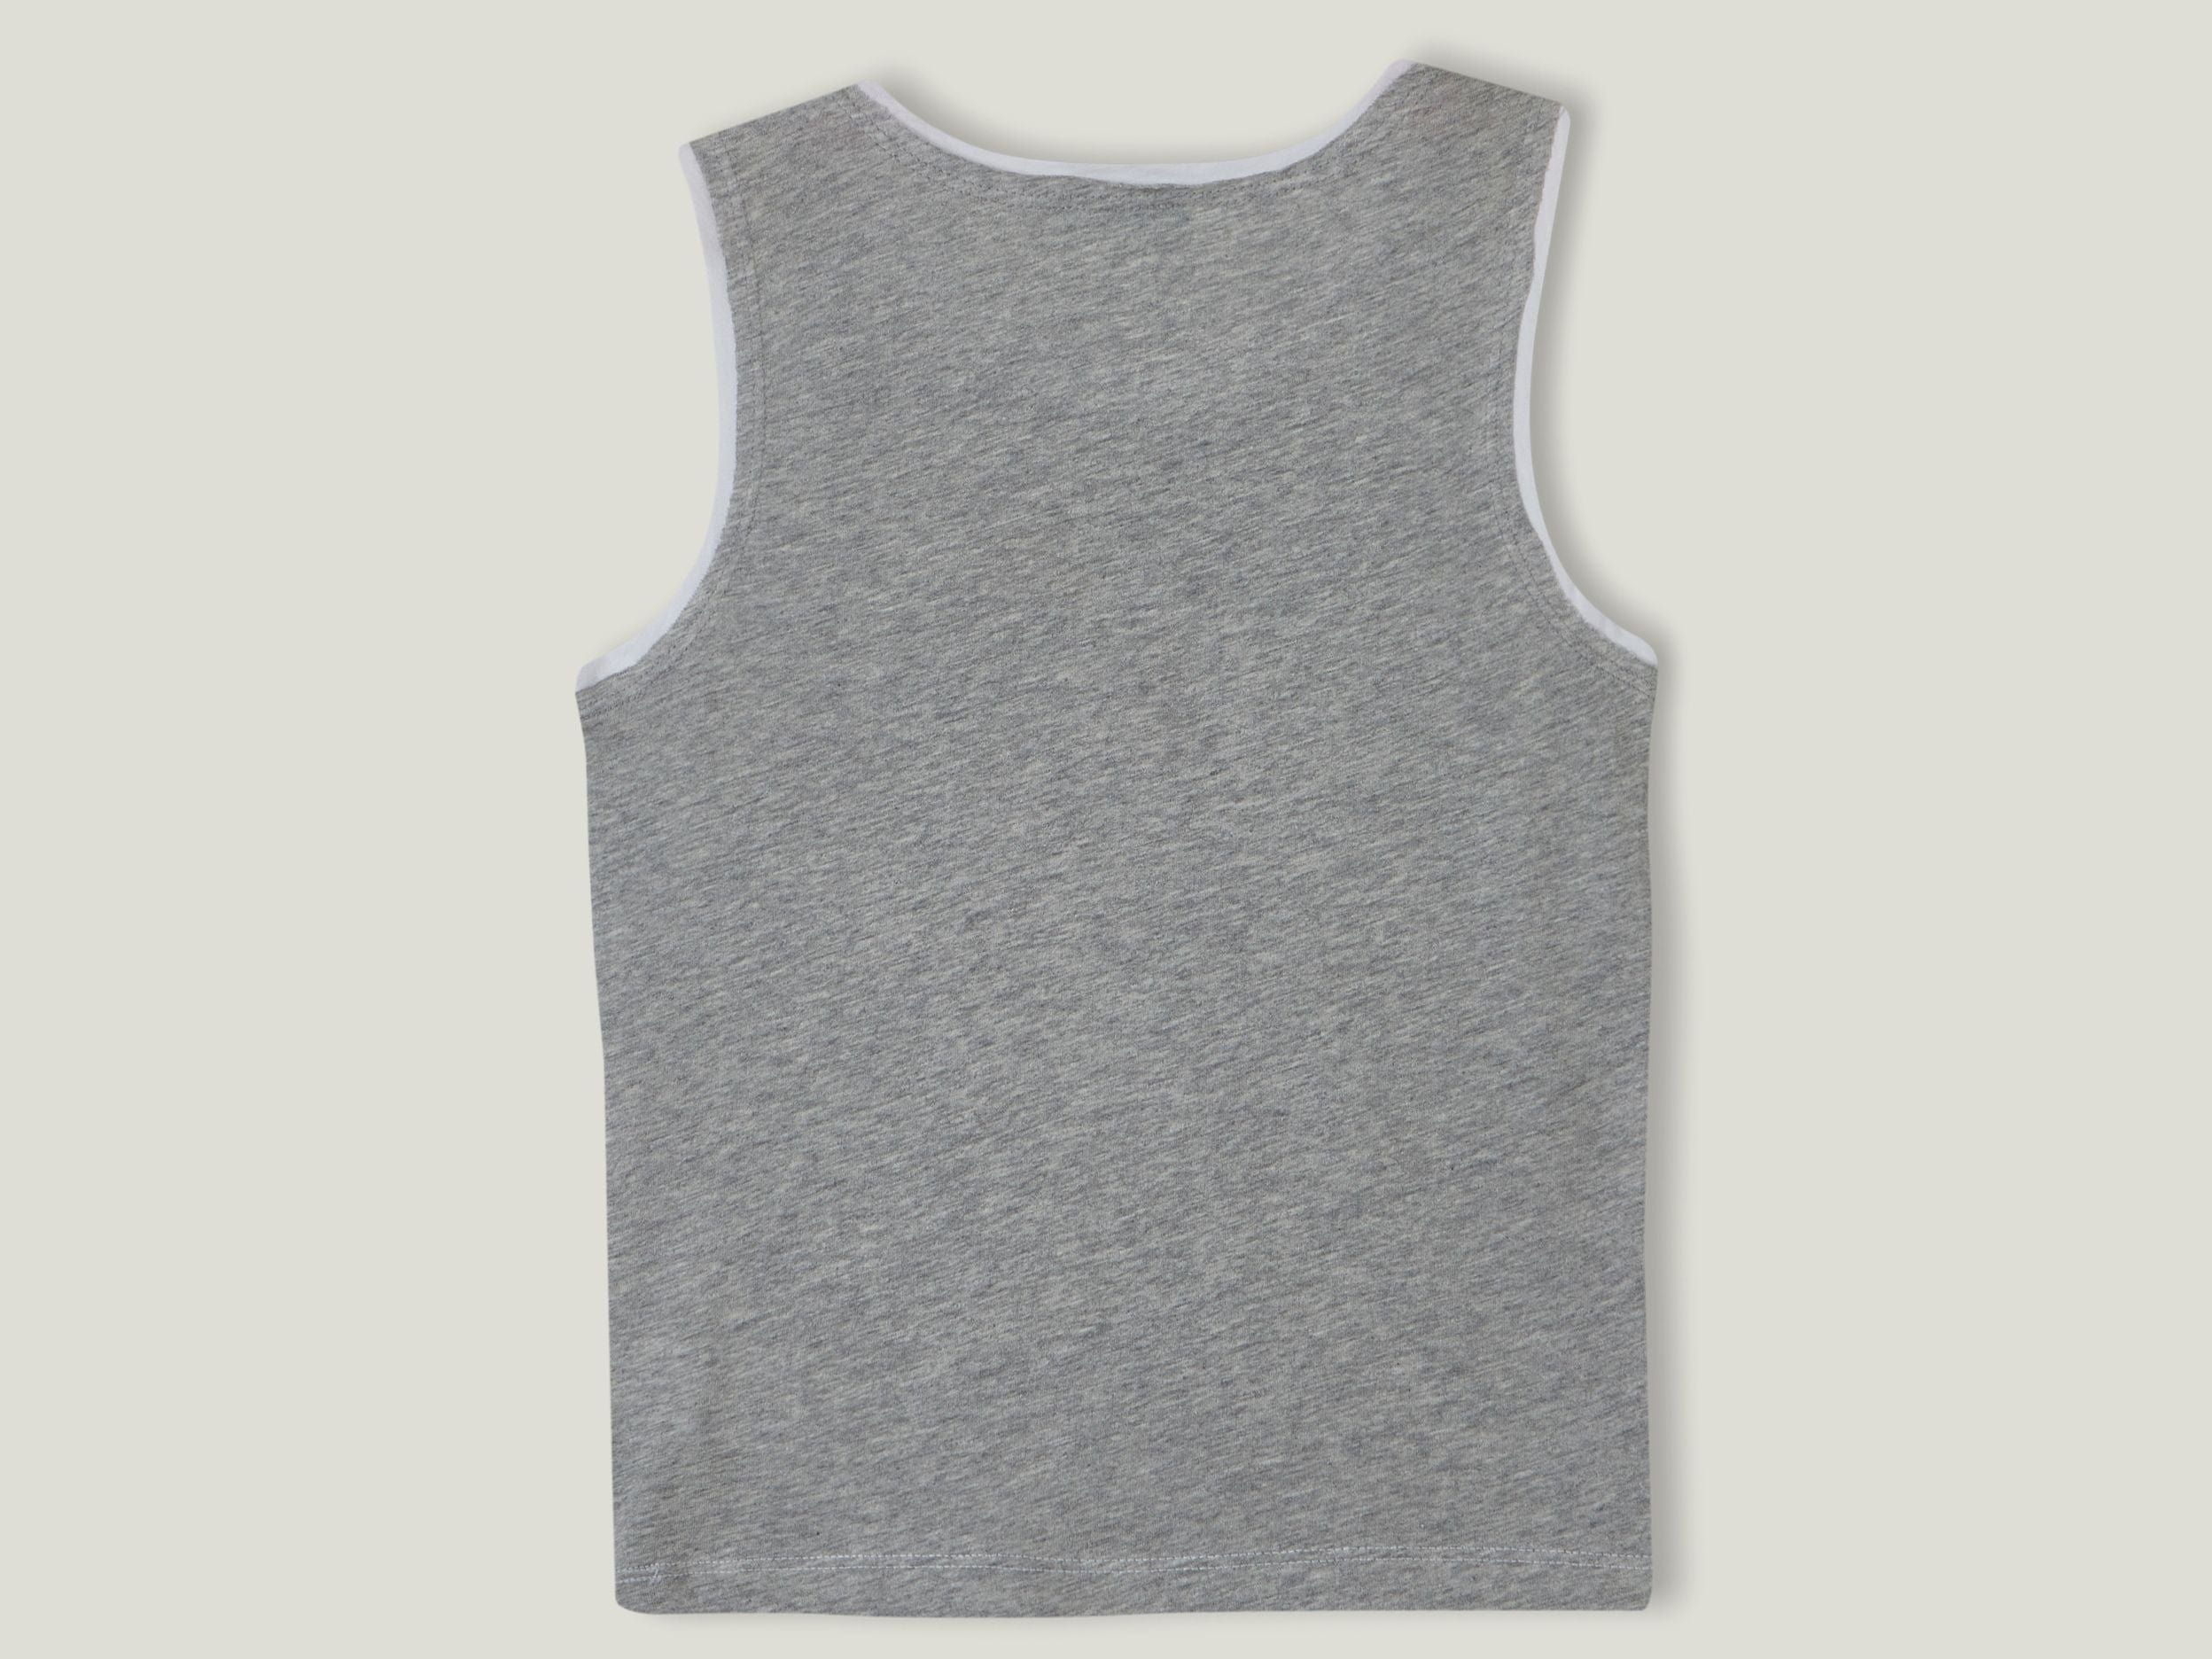 Lightweight tank top with print